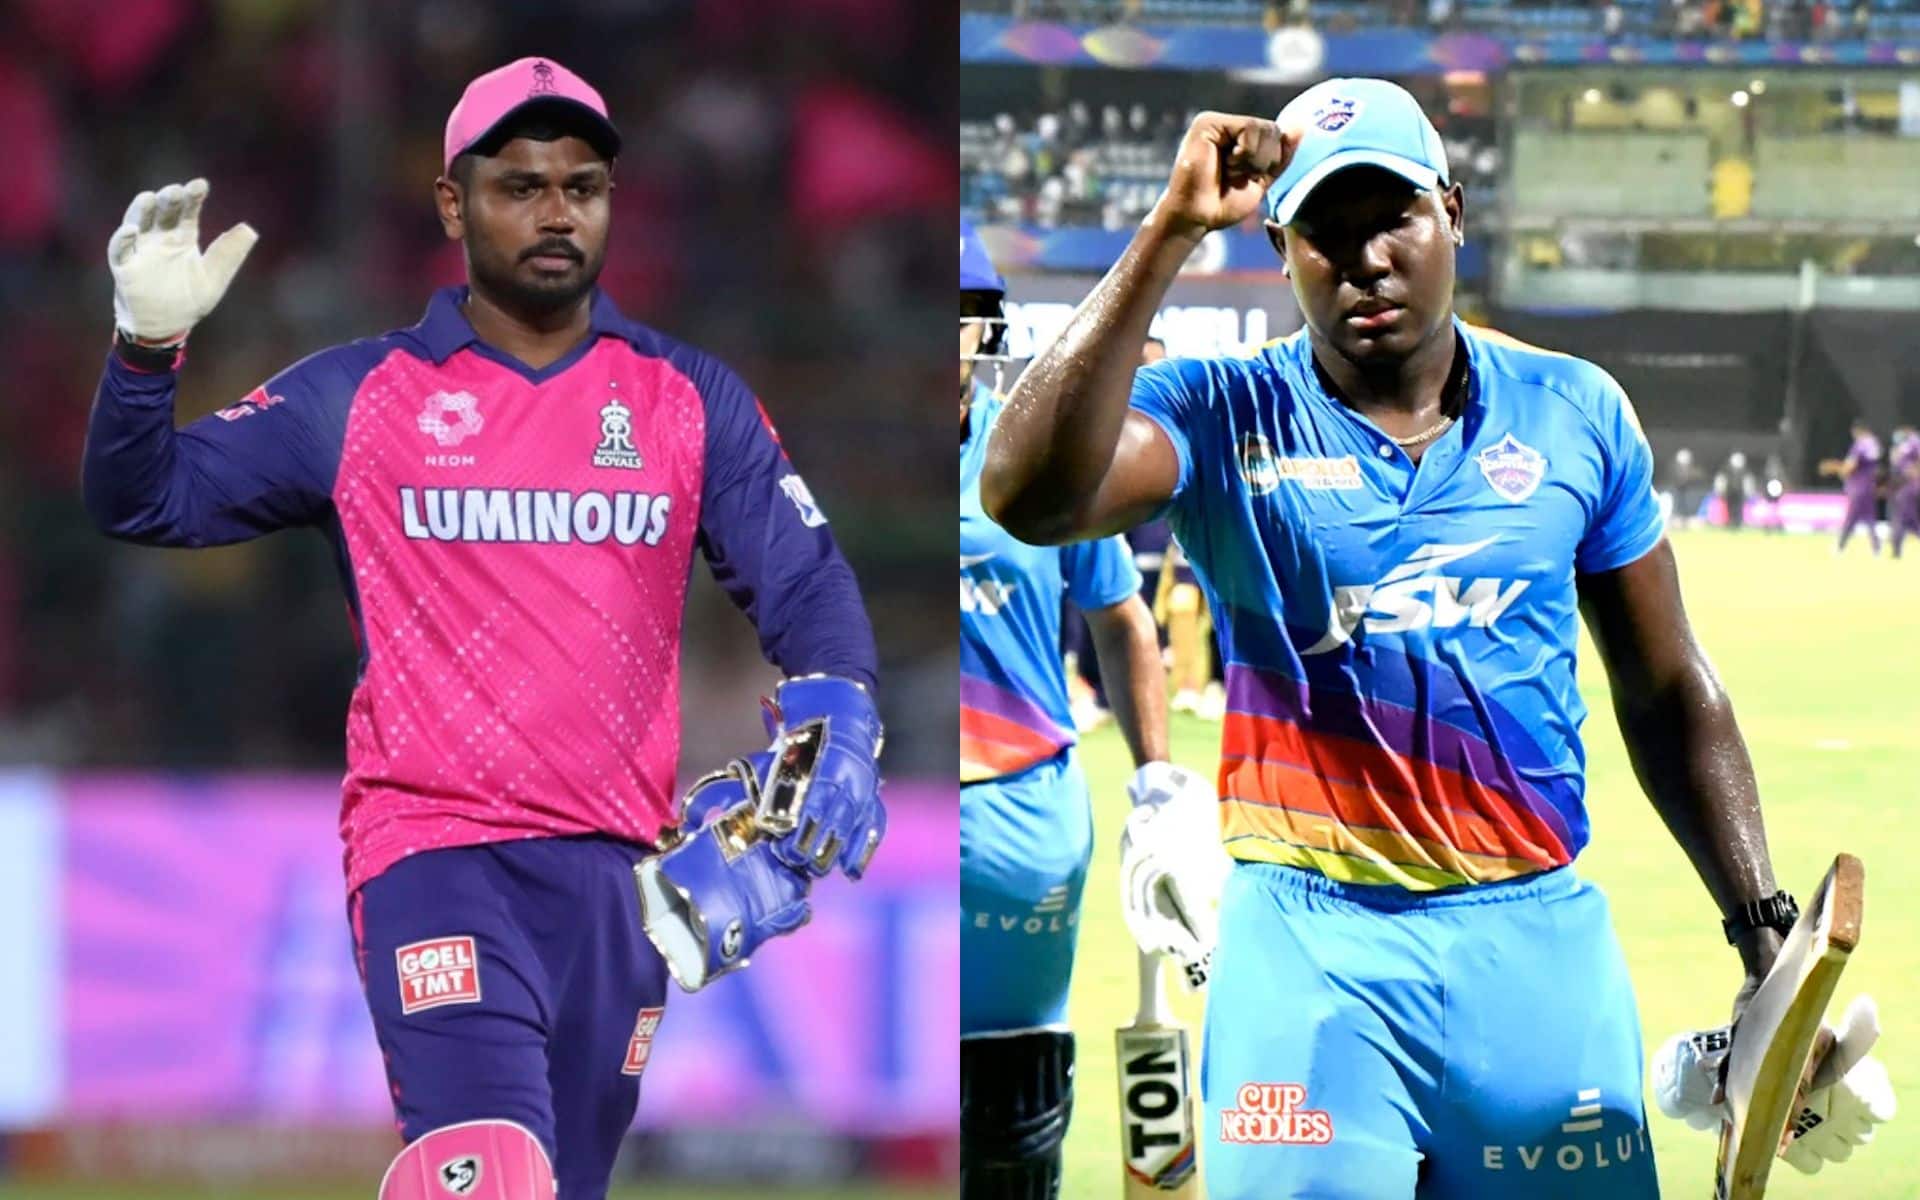 Sanju Samson has not given a chance to Powell yet (X.com)